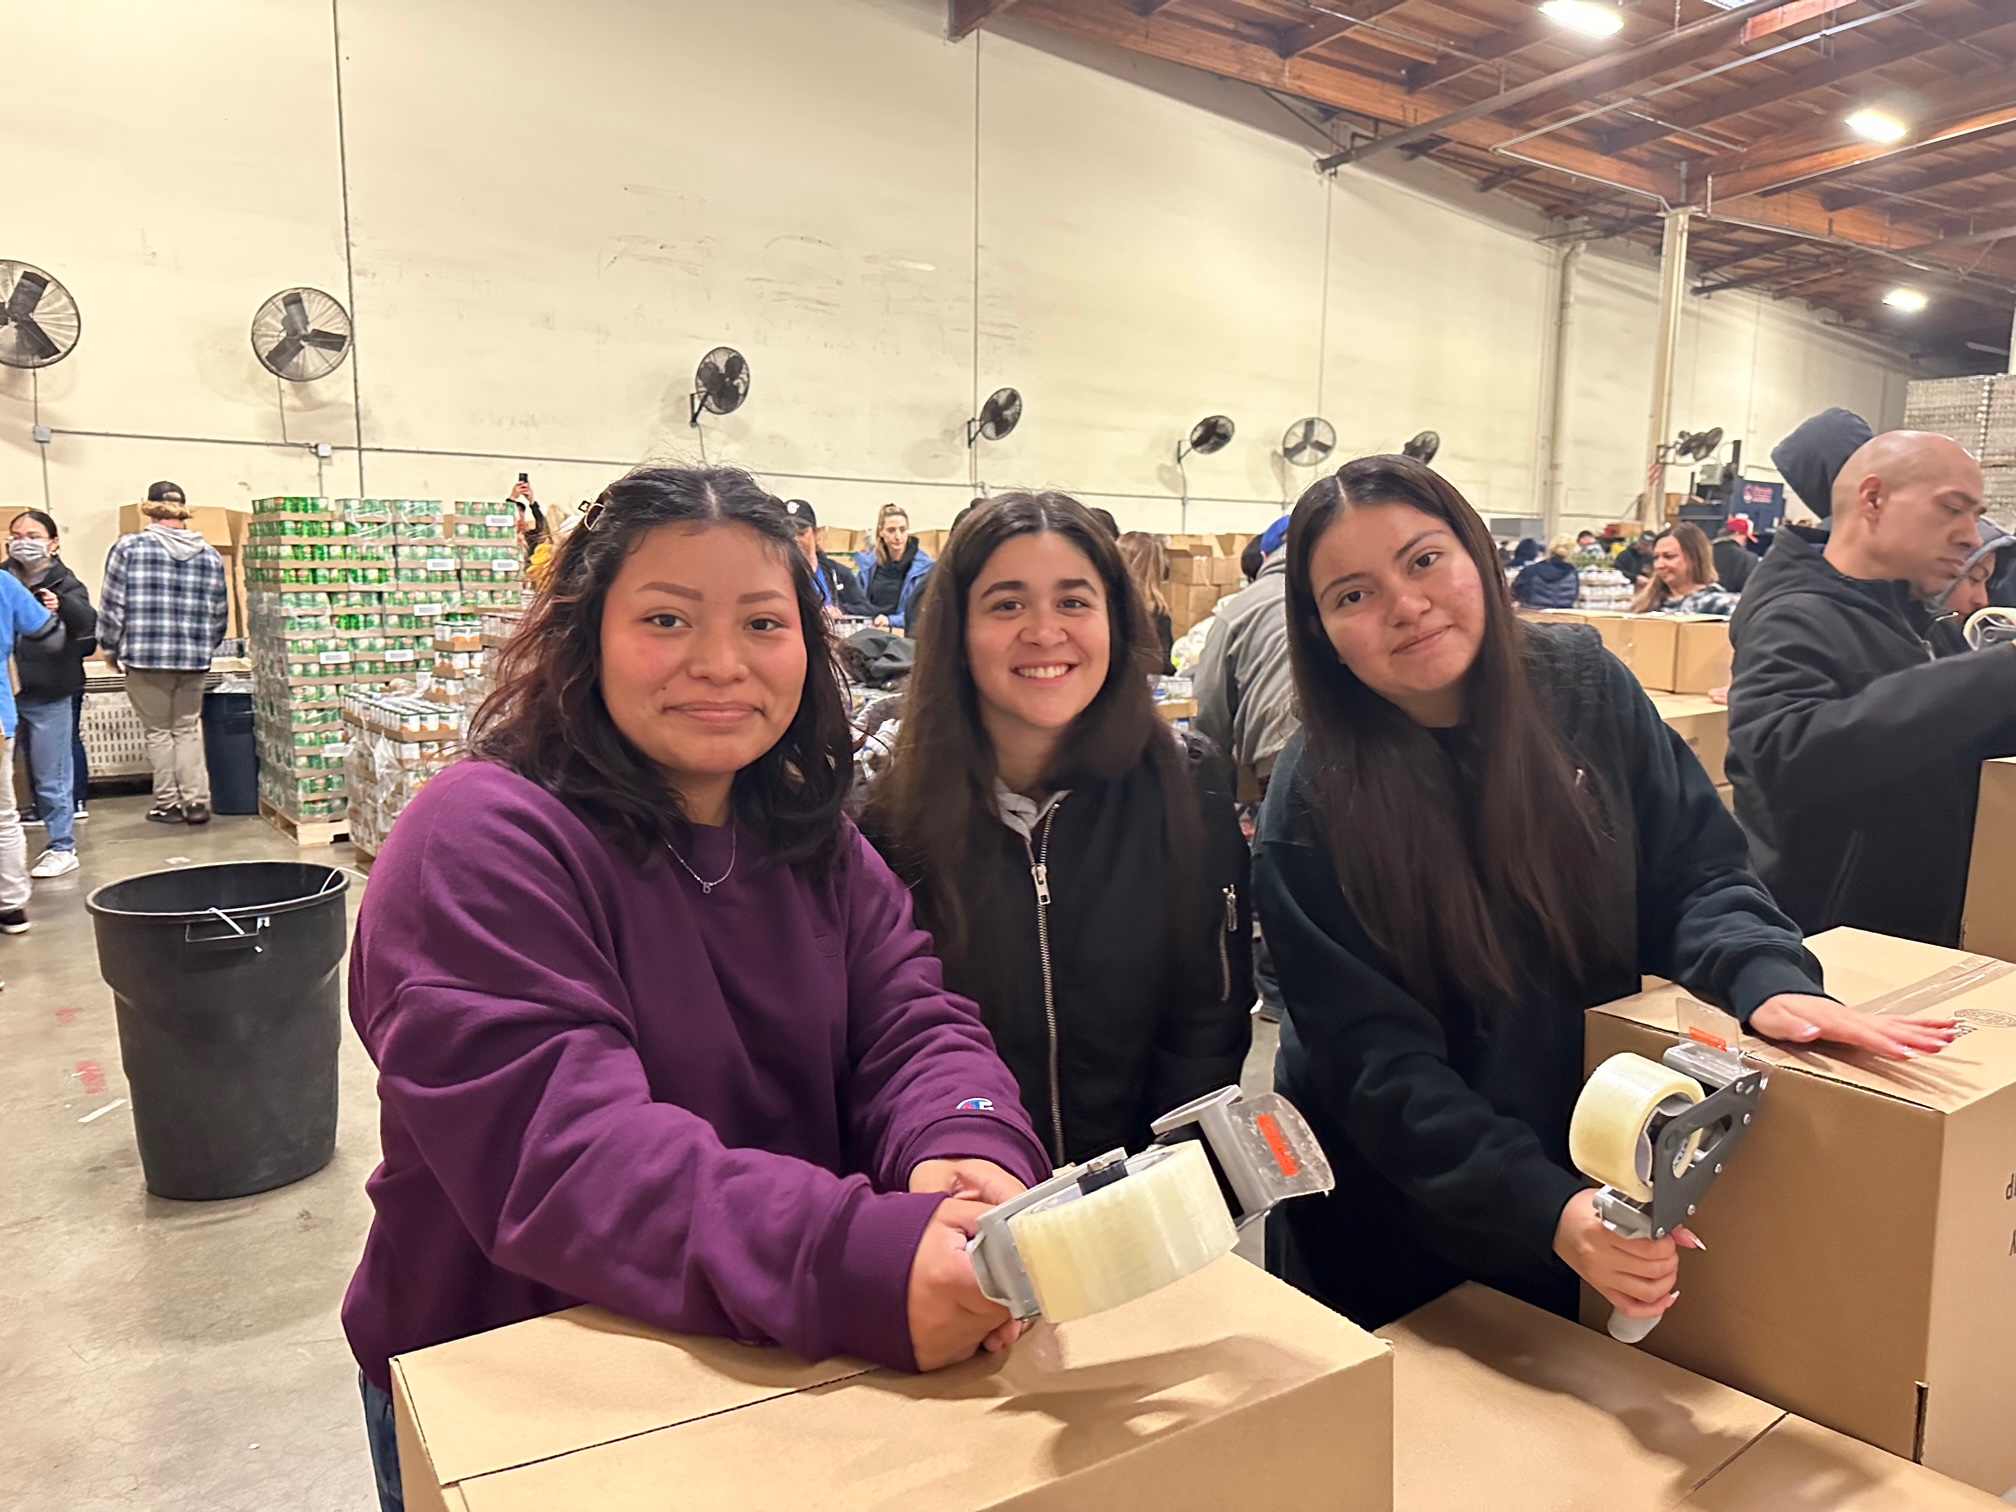 SAC ULink Students packacking food boxes at the OC Food Bank volunteer event.